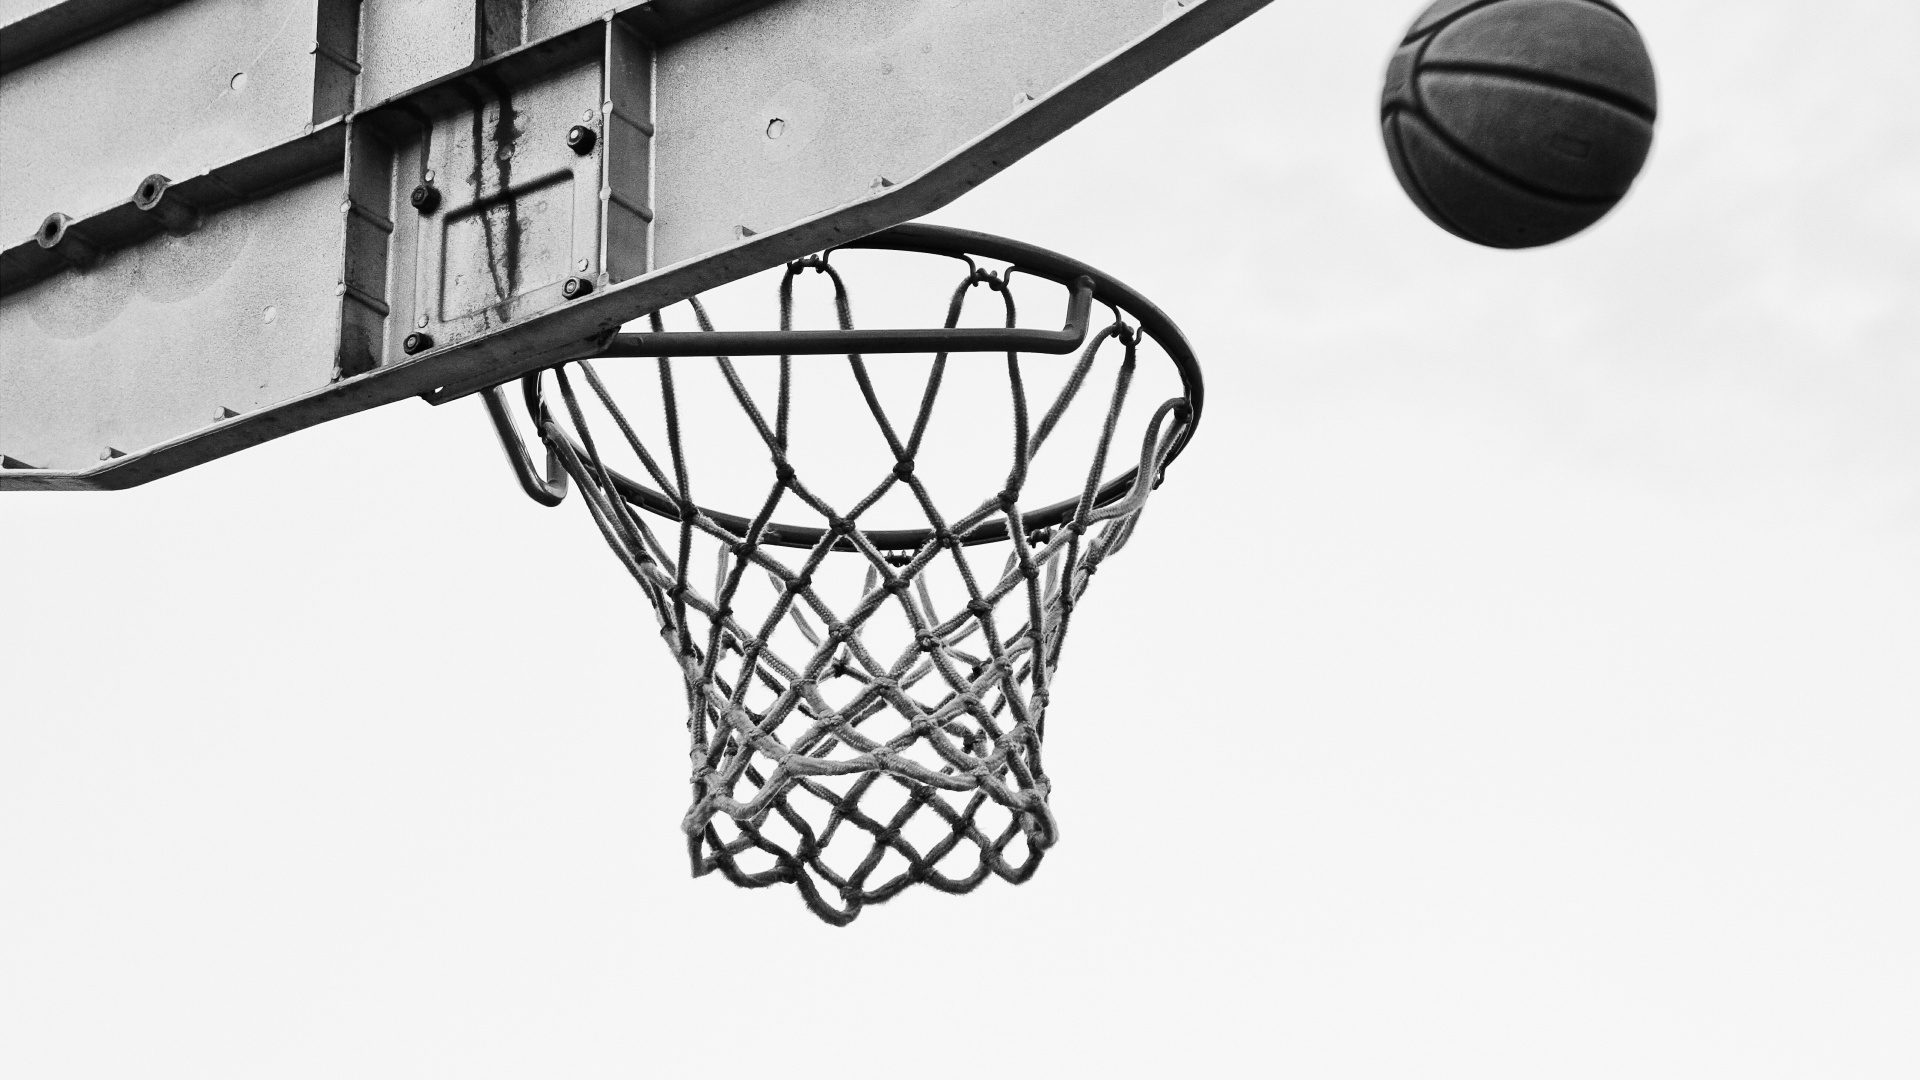 Basketball on Basketball Hoop in Grayscale Photography. Wallpaper in 1920x1080 Resolution